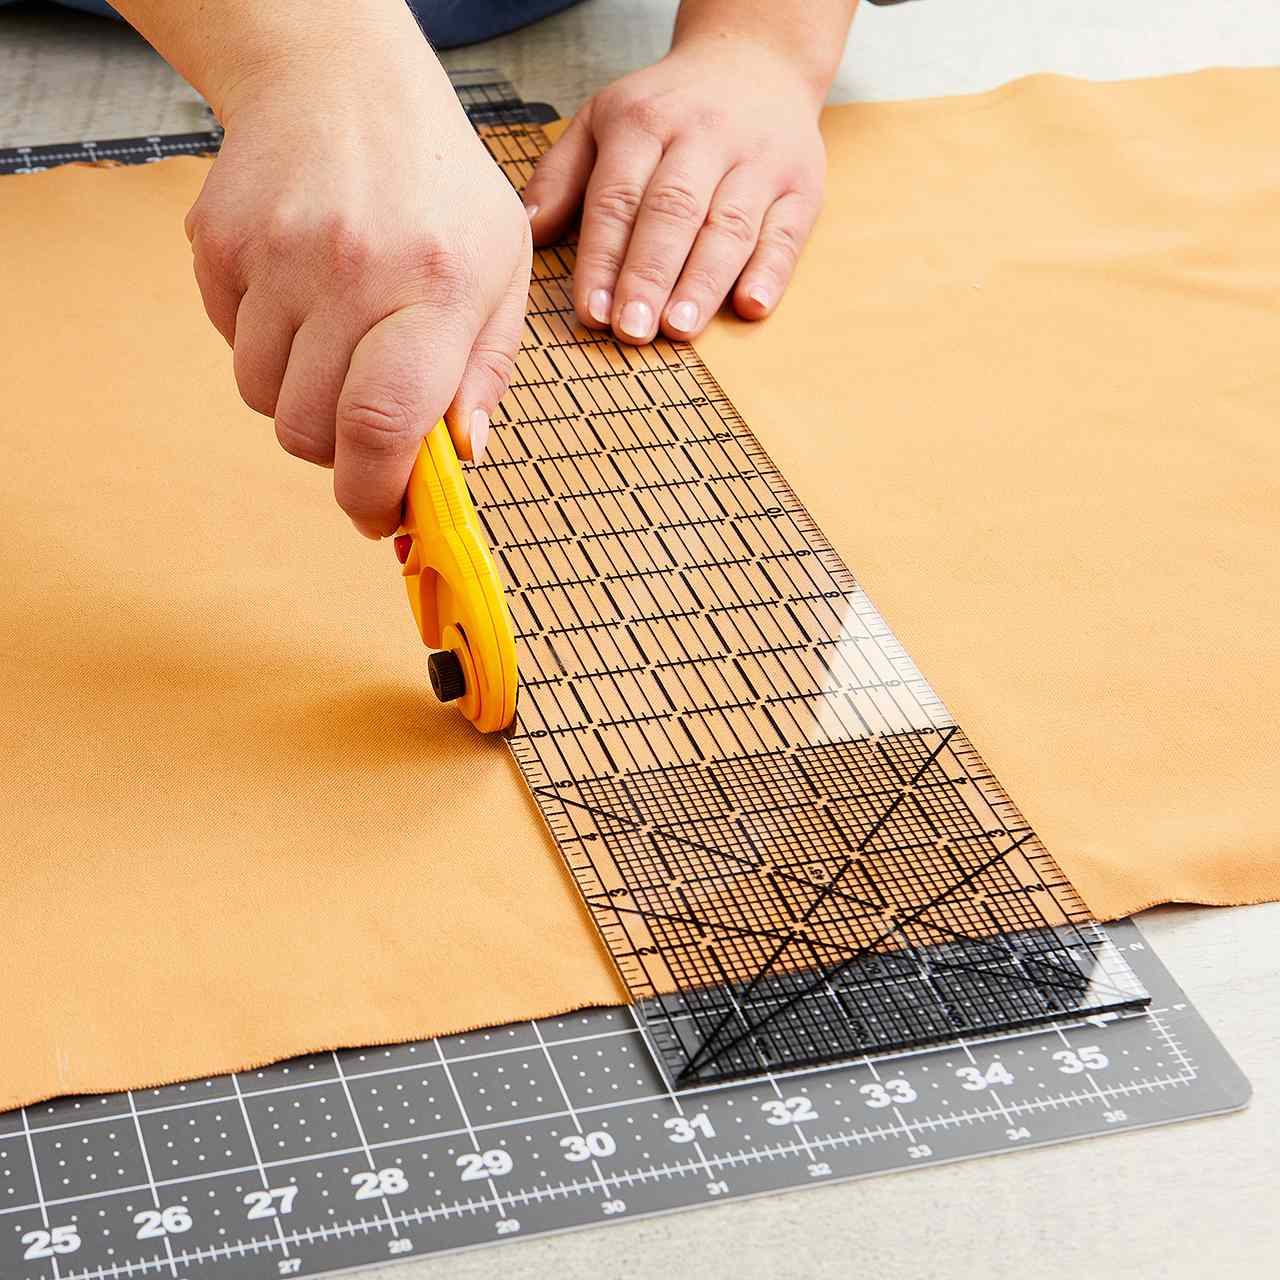 use rotary cutter to cut fabric